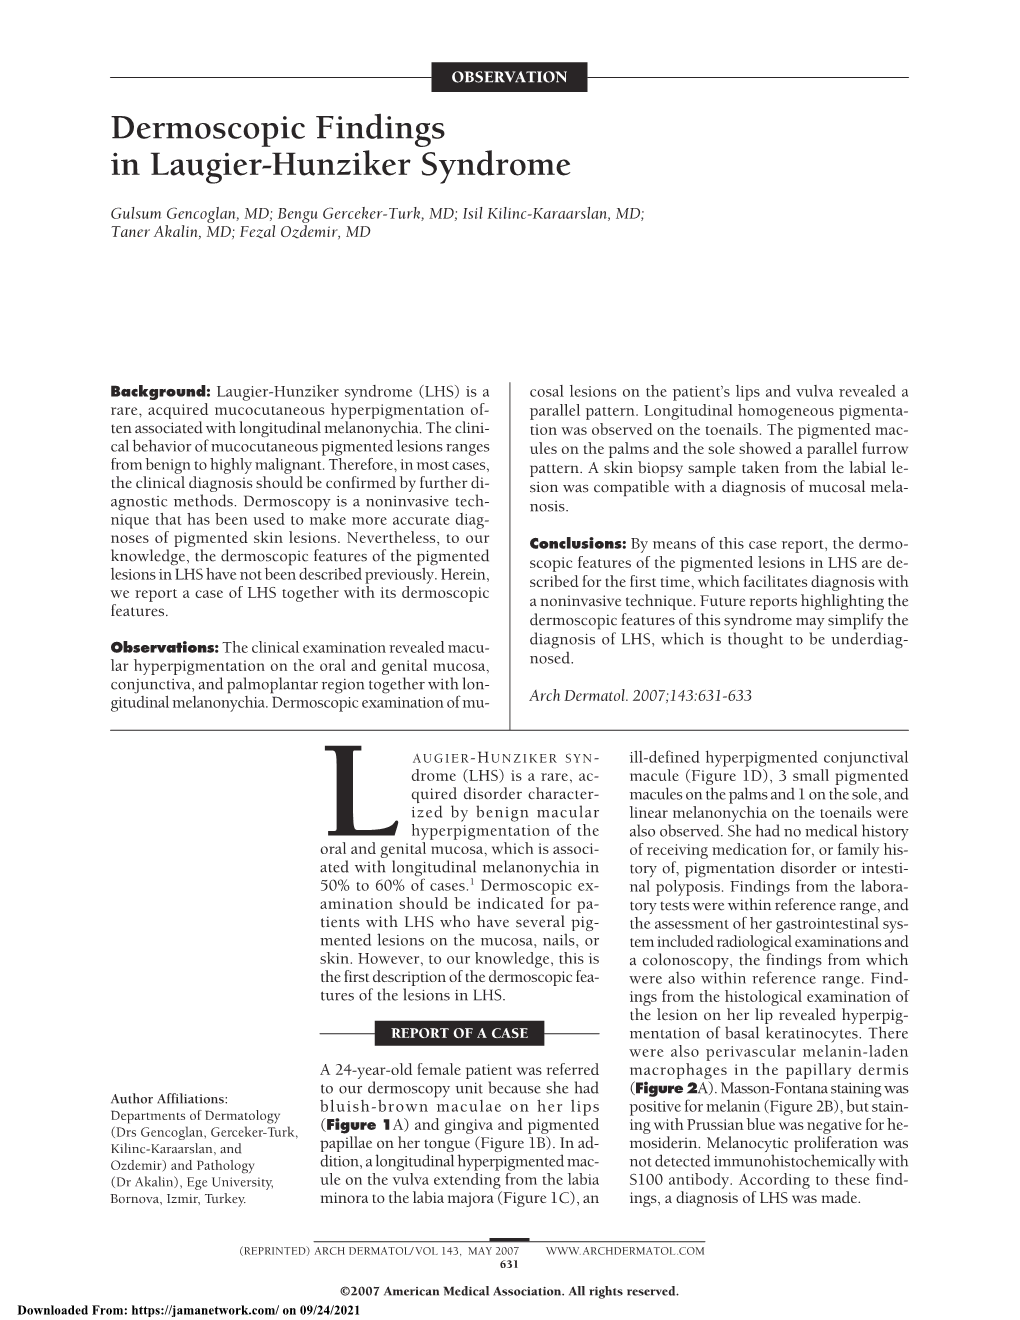 Dermoscopic Findings in Laugier-Hunziker Syndrome